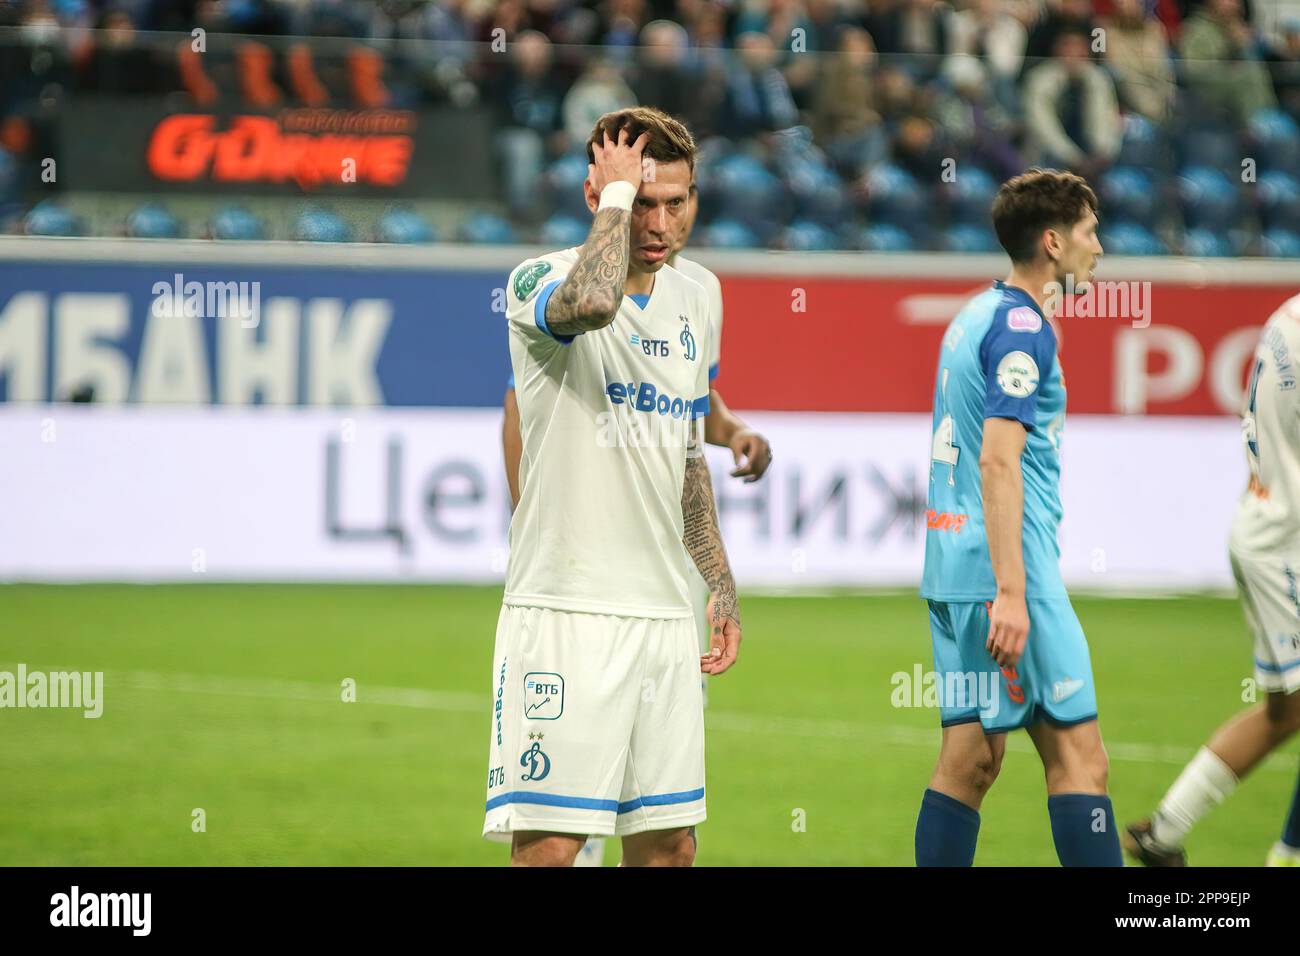 Saint Petersburg, Russia. 22nd Apr, 2023. Fedor Smolov (No.10) of Dynamo seen during the Russian Premier League football match between Zenit Saint Petersburg and Dynamo Moscow at Gazprom Arena. Zenit 3:1 Dynamo. (Photo by Maksim Konstantinov/SOPA Images/Sipa USA) Credit: Sipa USA/Alamy Live News Stock Photo